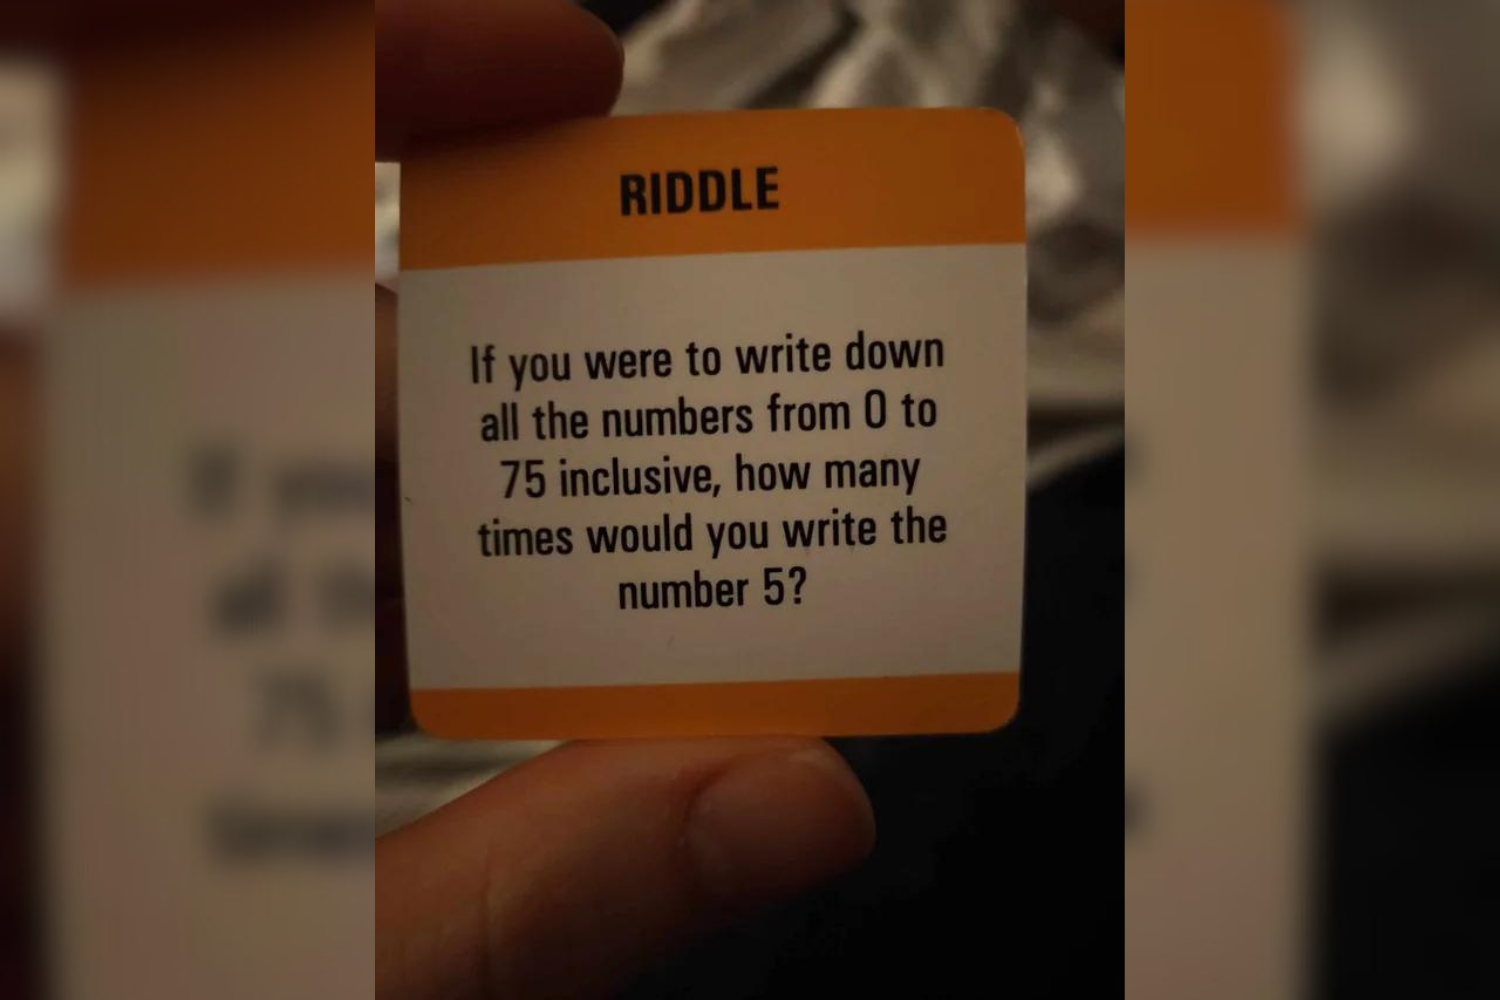 Riddle That ‘Doesn’t Make Sense’ Stumps Internet, but Can You Work It Out?